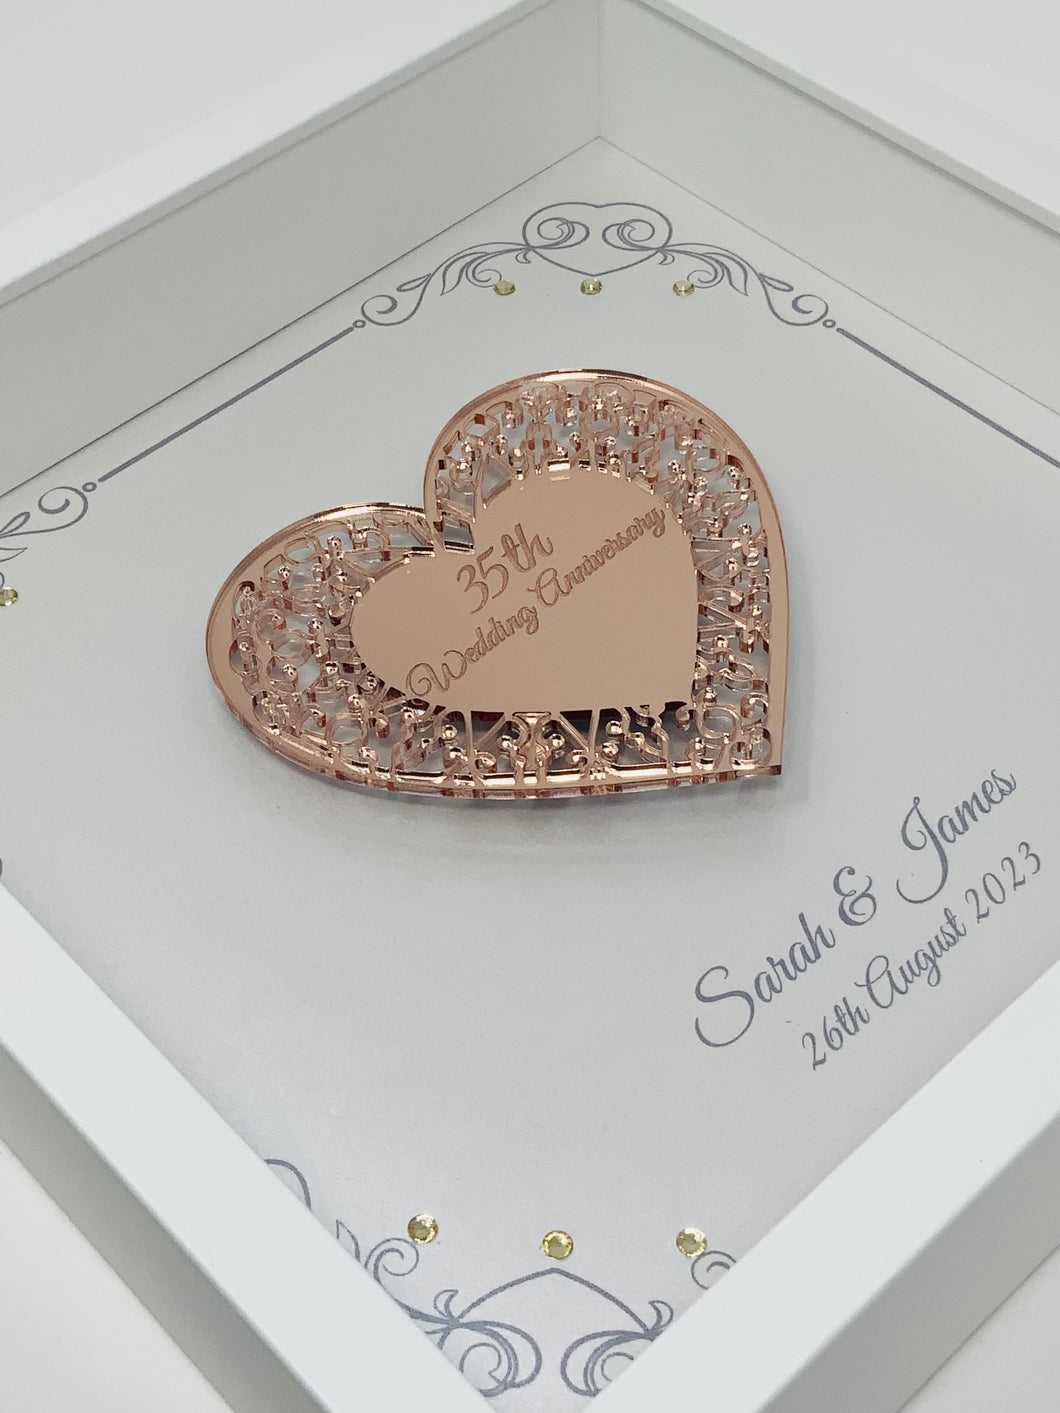 35th Coral 35 Years Wedding Anniversary Frame - Intricate Mirror Heart